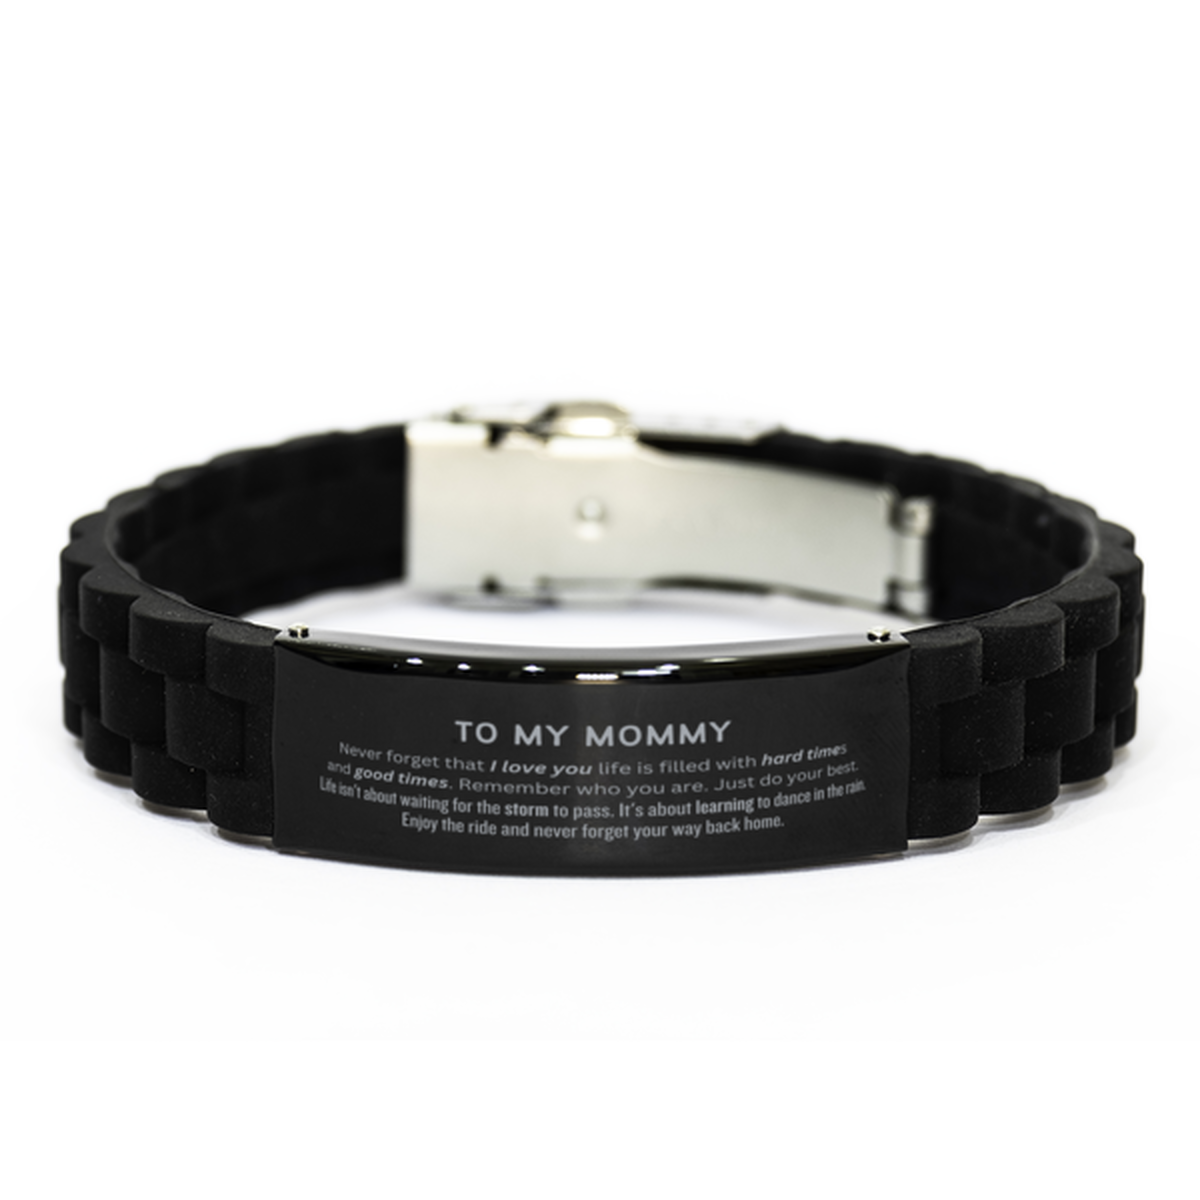 Christmas Mommy Black Glidelock Clasp Bracelet Gifts, To My Mommy Birthday Thank You Gifts For Mommy, Graduation Unique Gifts For Mommy To My Mommy Never forget that I love you life is filled with hard times and good times. Remember who you are. Just do y